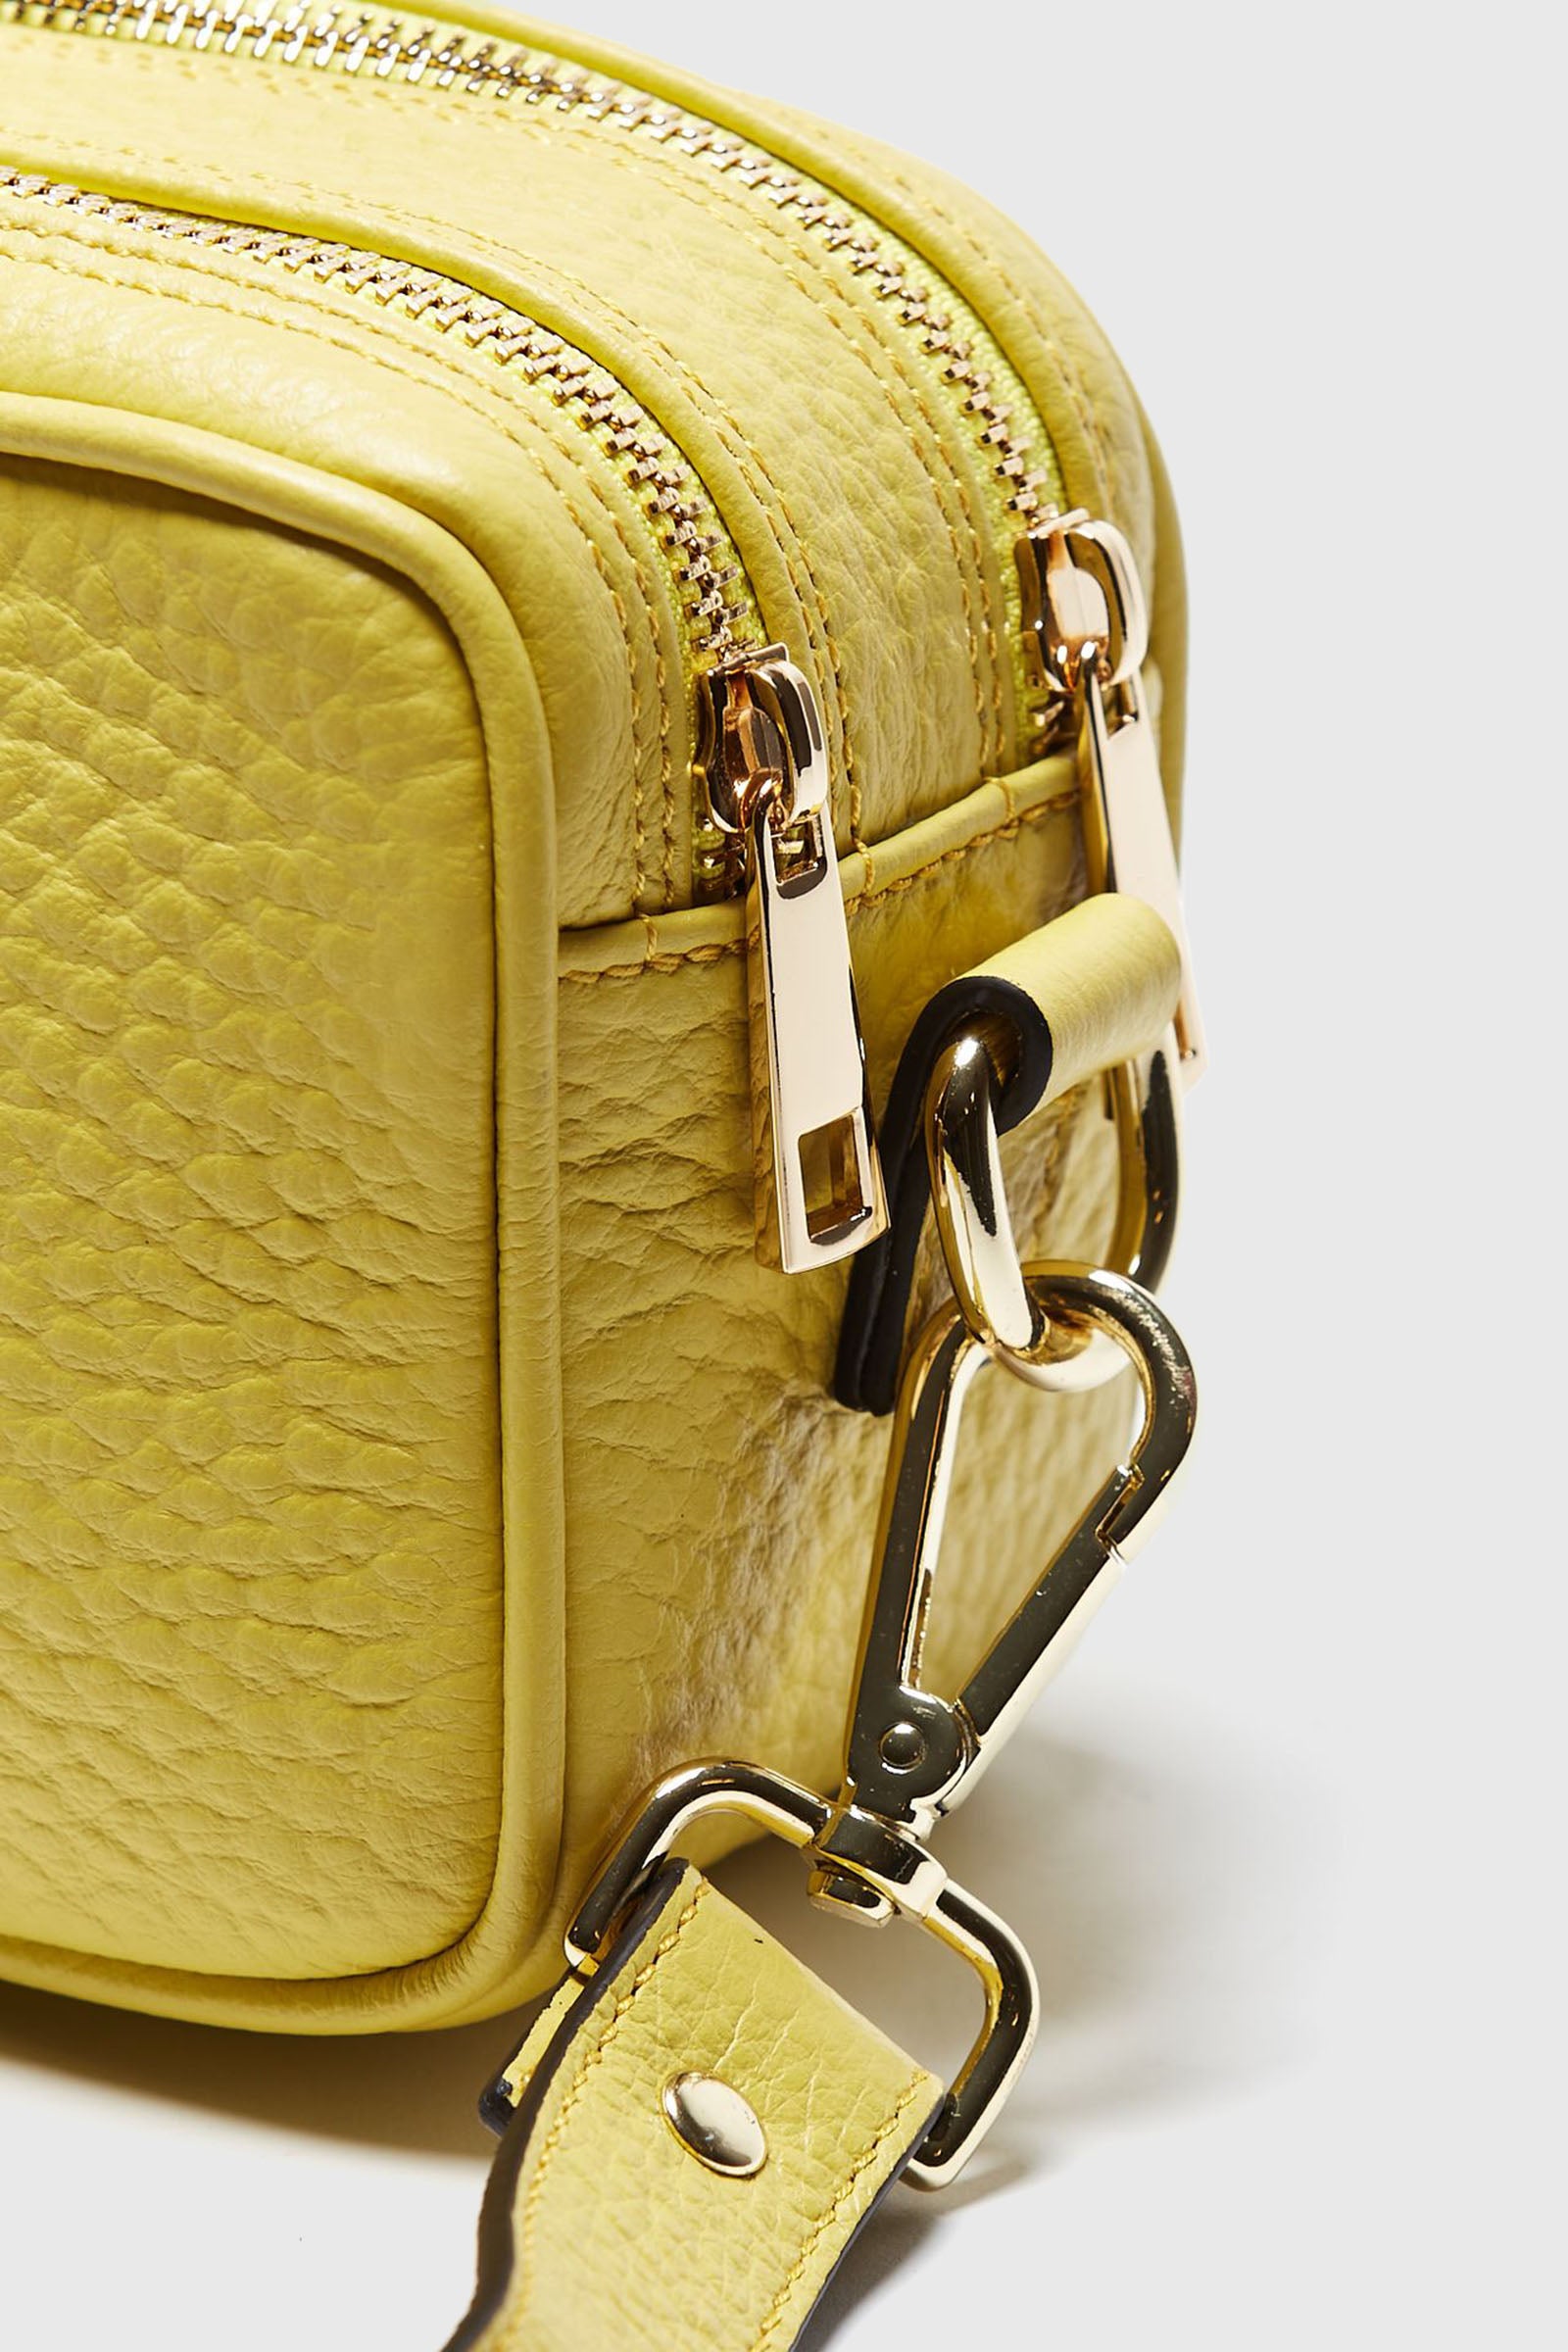 Avenue 67 Gabrielle Leather Bag Yellow - 2